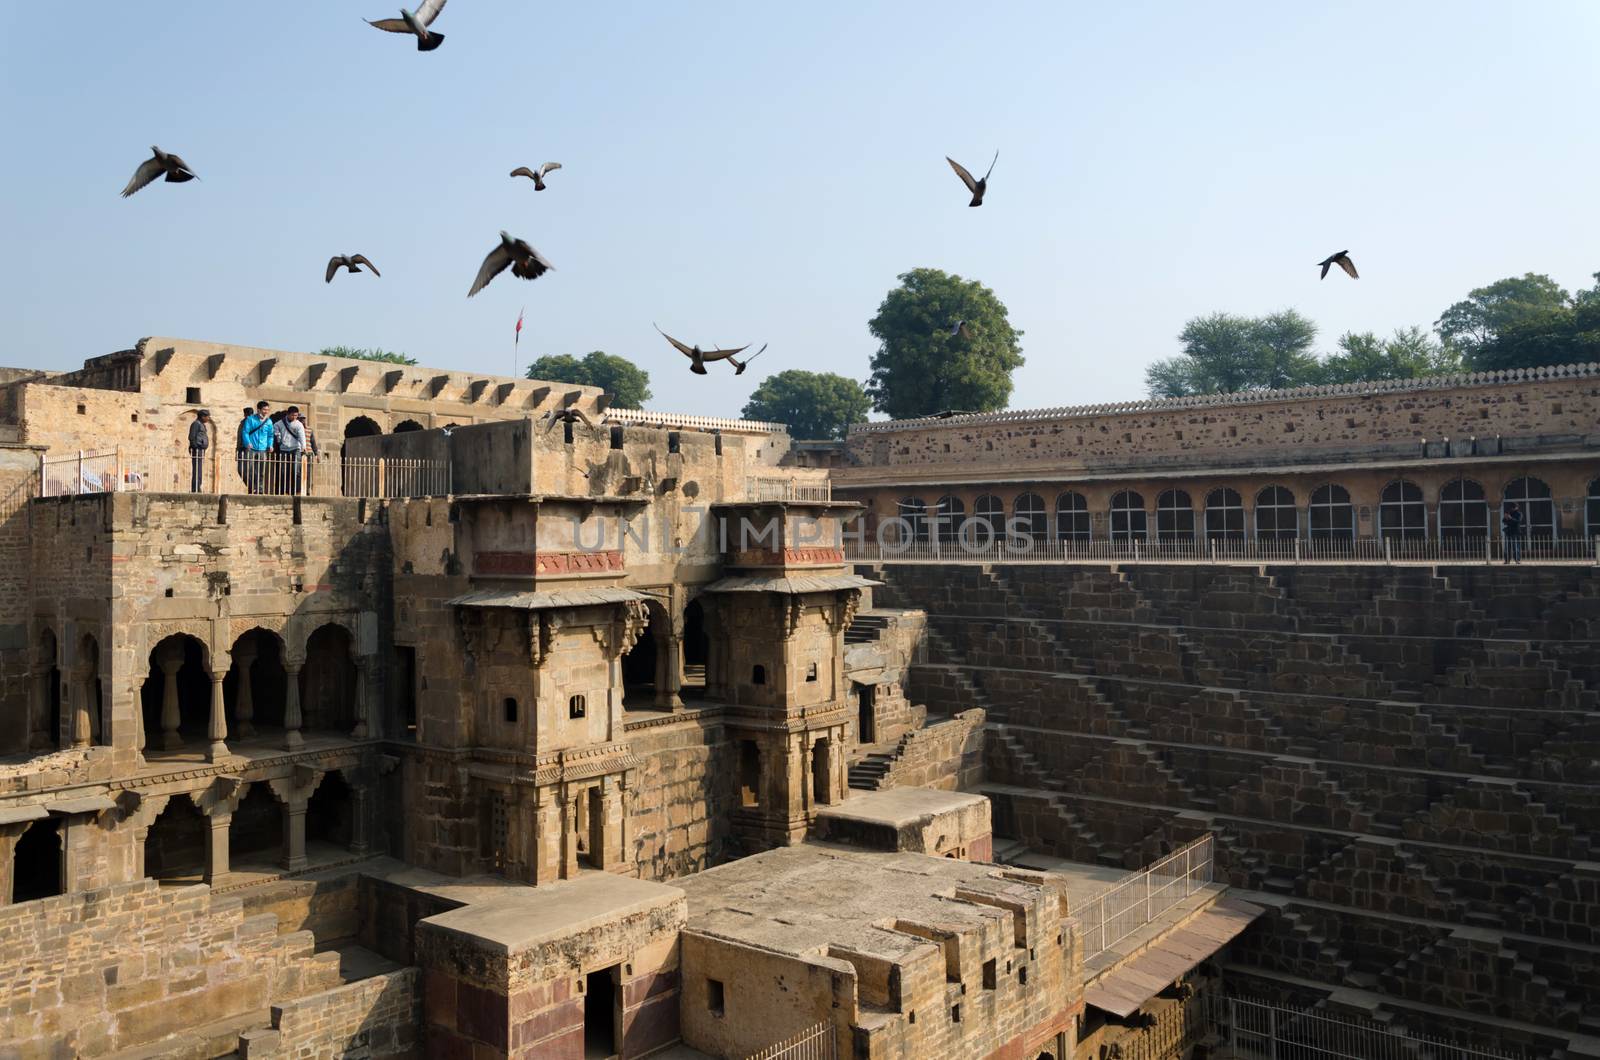 Jaipur, India - December 30, 2014: Tourist visit Chand Baori Stepwell, Jaipur, Rajasthan, India on December 30, 2014.  It was built by King Chanda of the Nikumbha Dynasty between 800 and 900 AD 